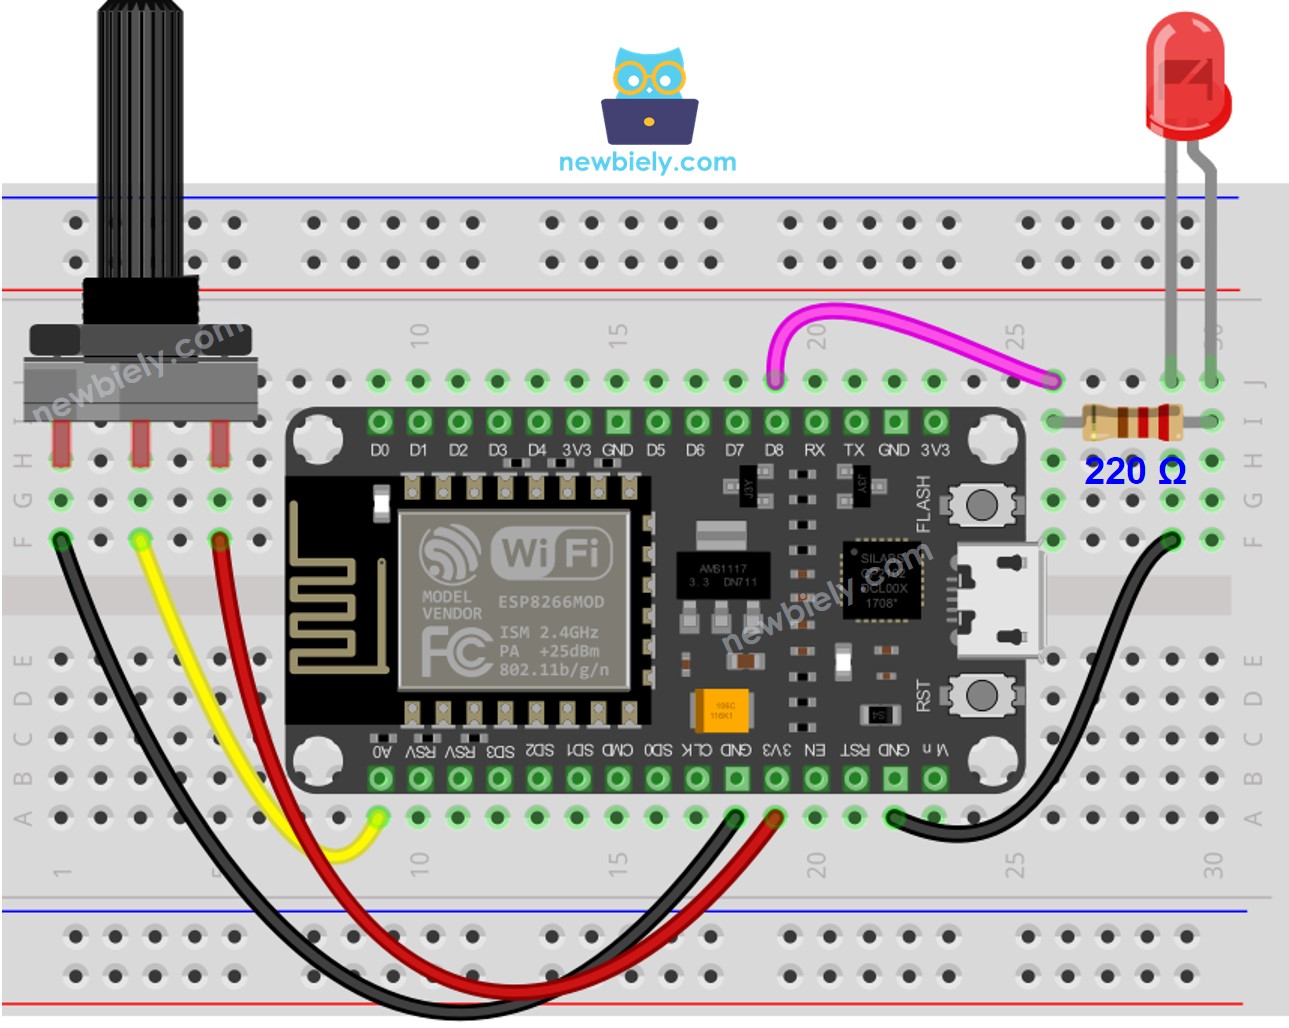 The wiring diagram between ESP8266 NodeMCU and Potentiometer LED